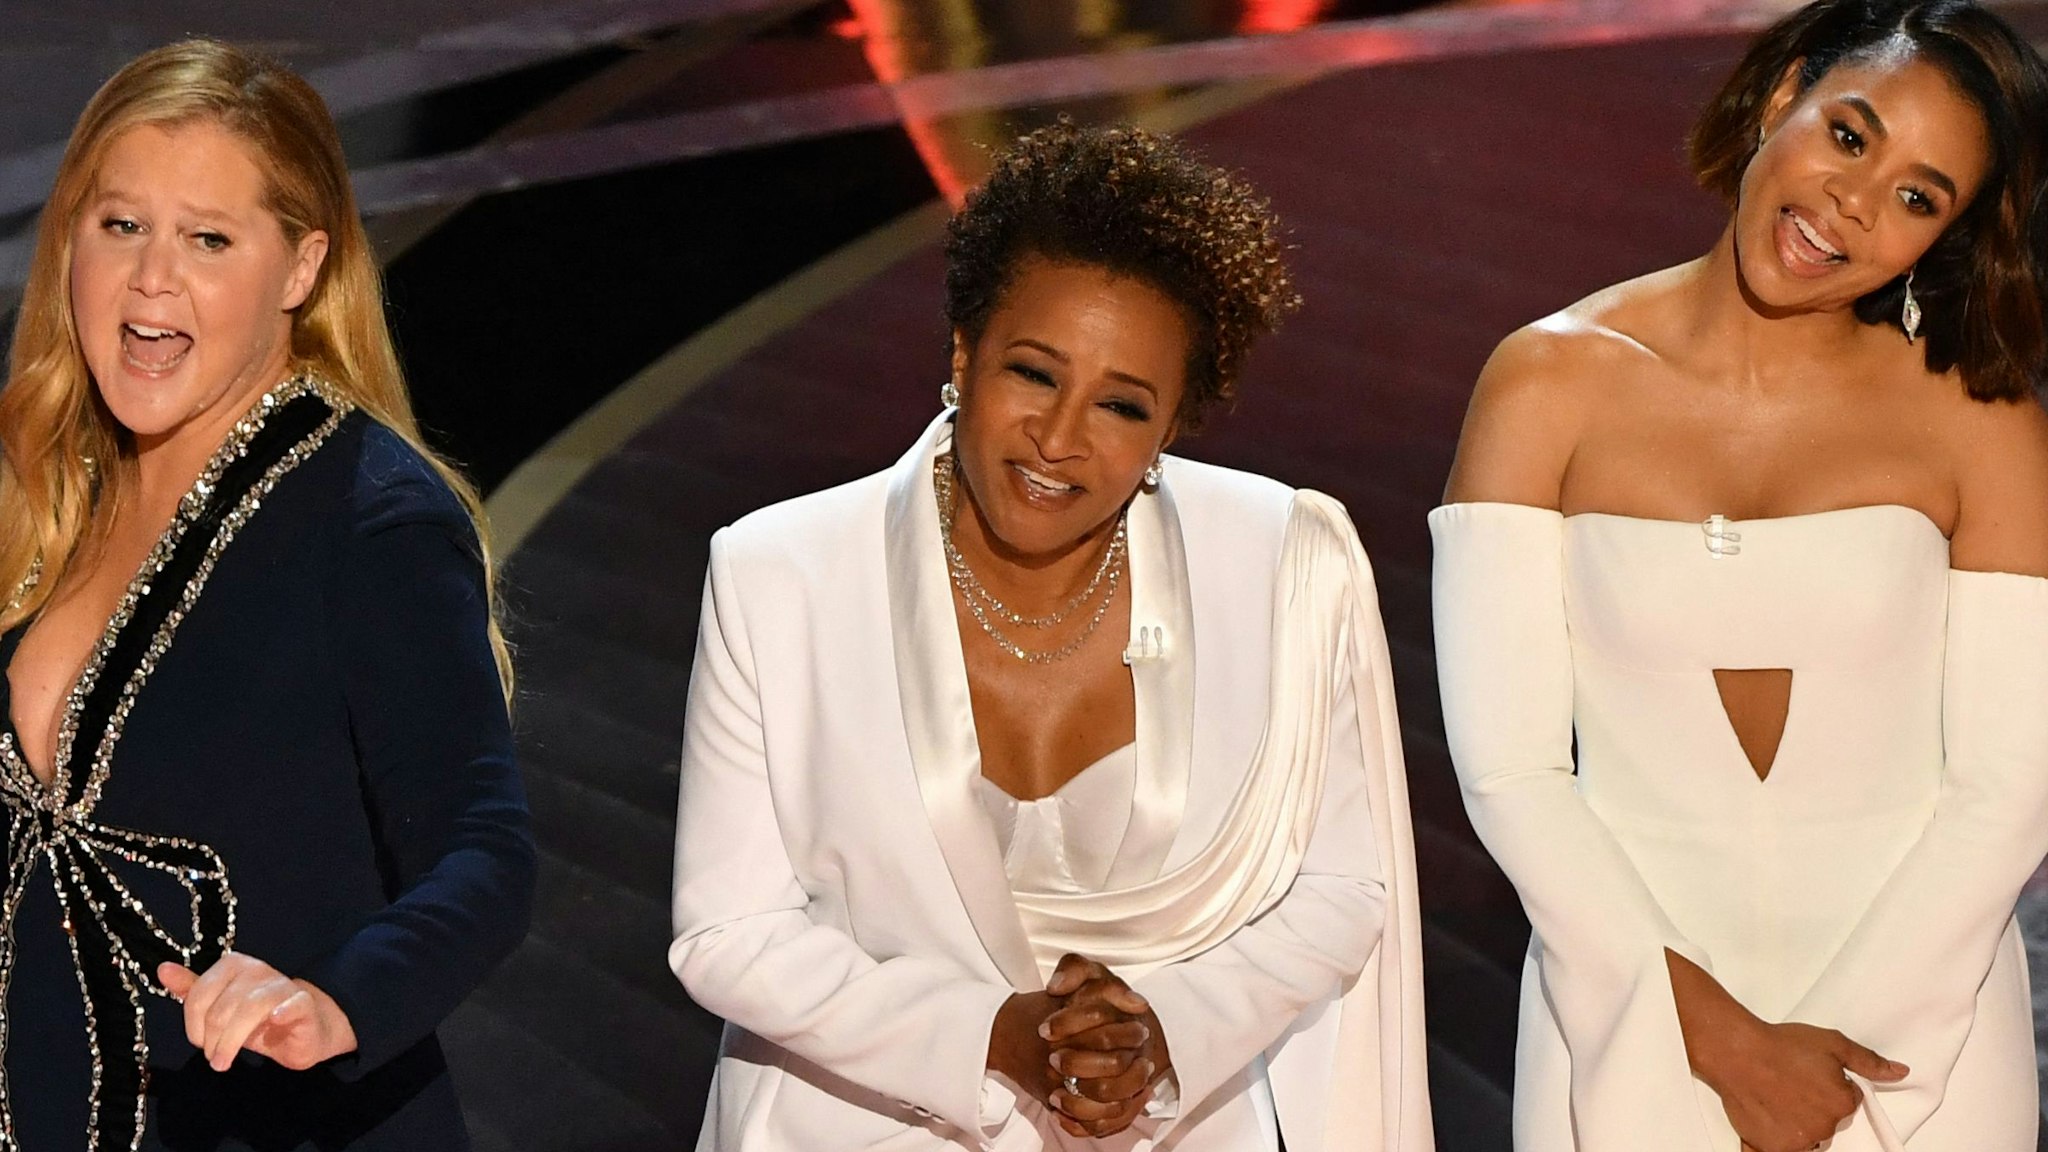 US actress and comedian Wanda Sykes (C) and US actress Regina Hall speak onstage during the 94th Oscars at the Dolby Theatre in Hollywood, California on March 27, 2022. (Photo by Robyn Beck / AFP)